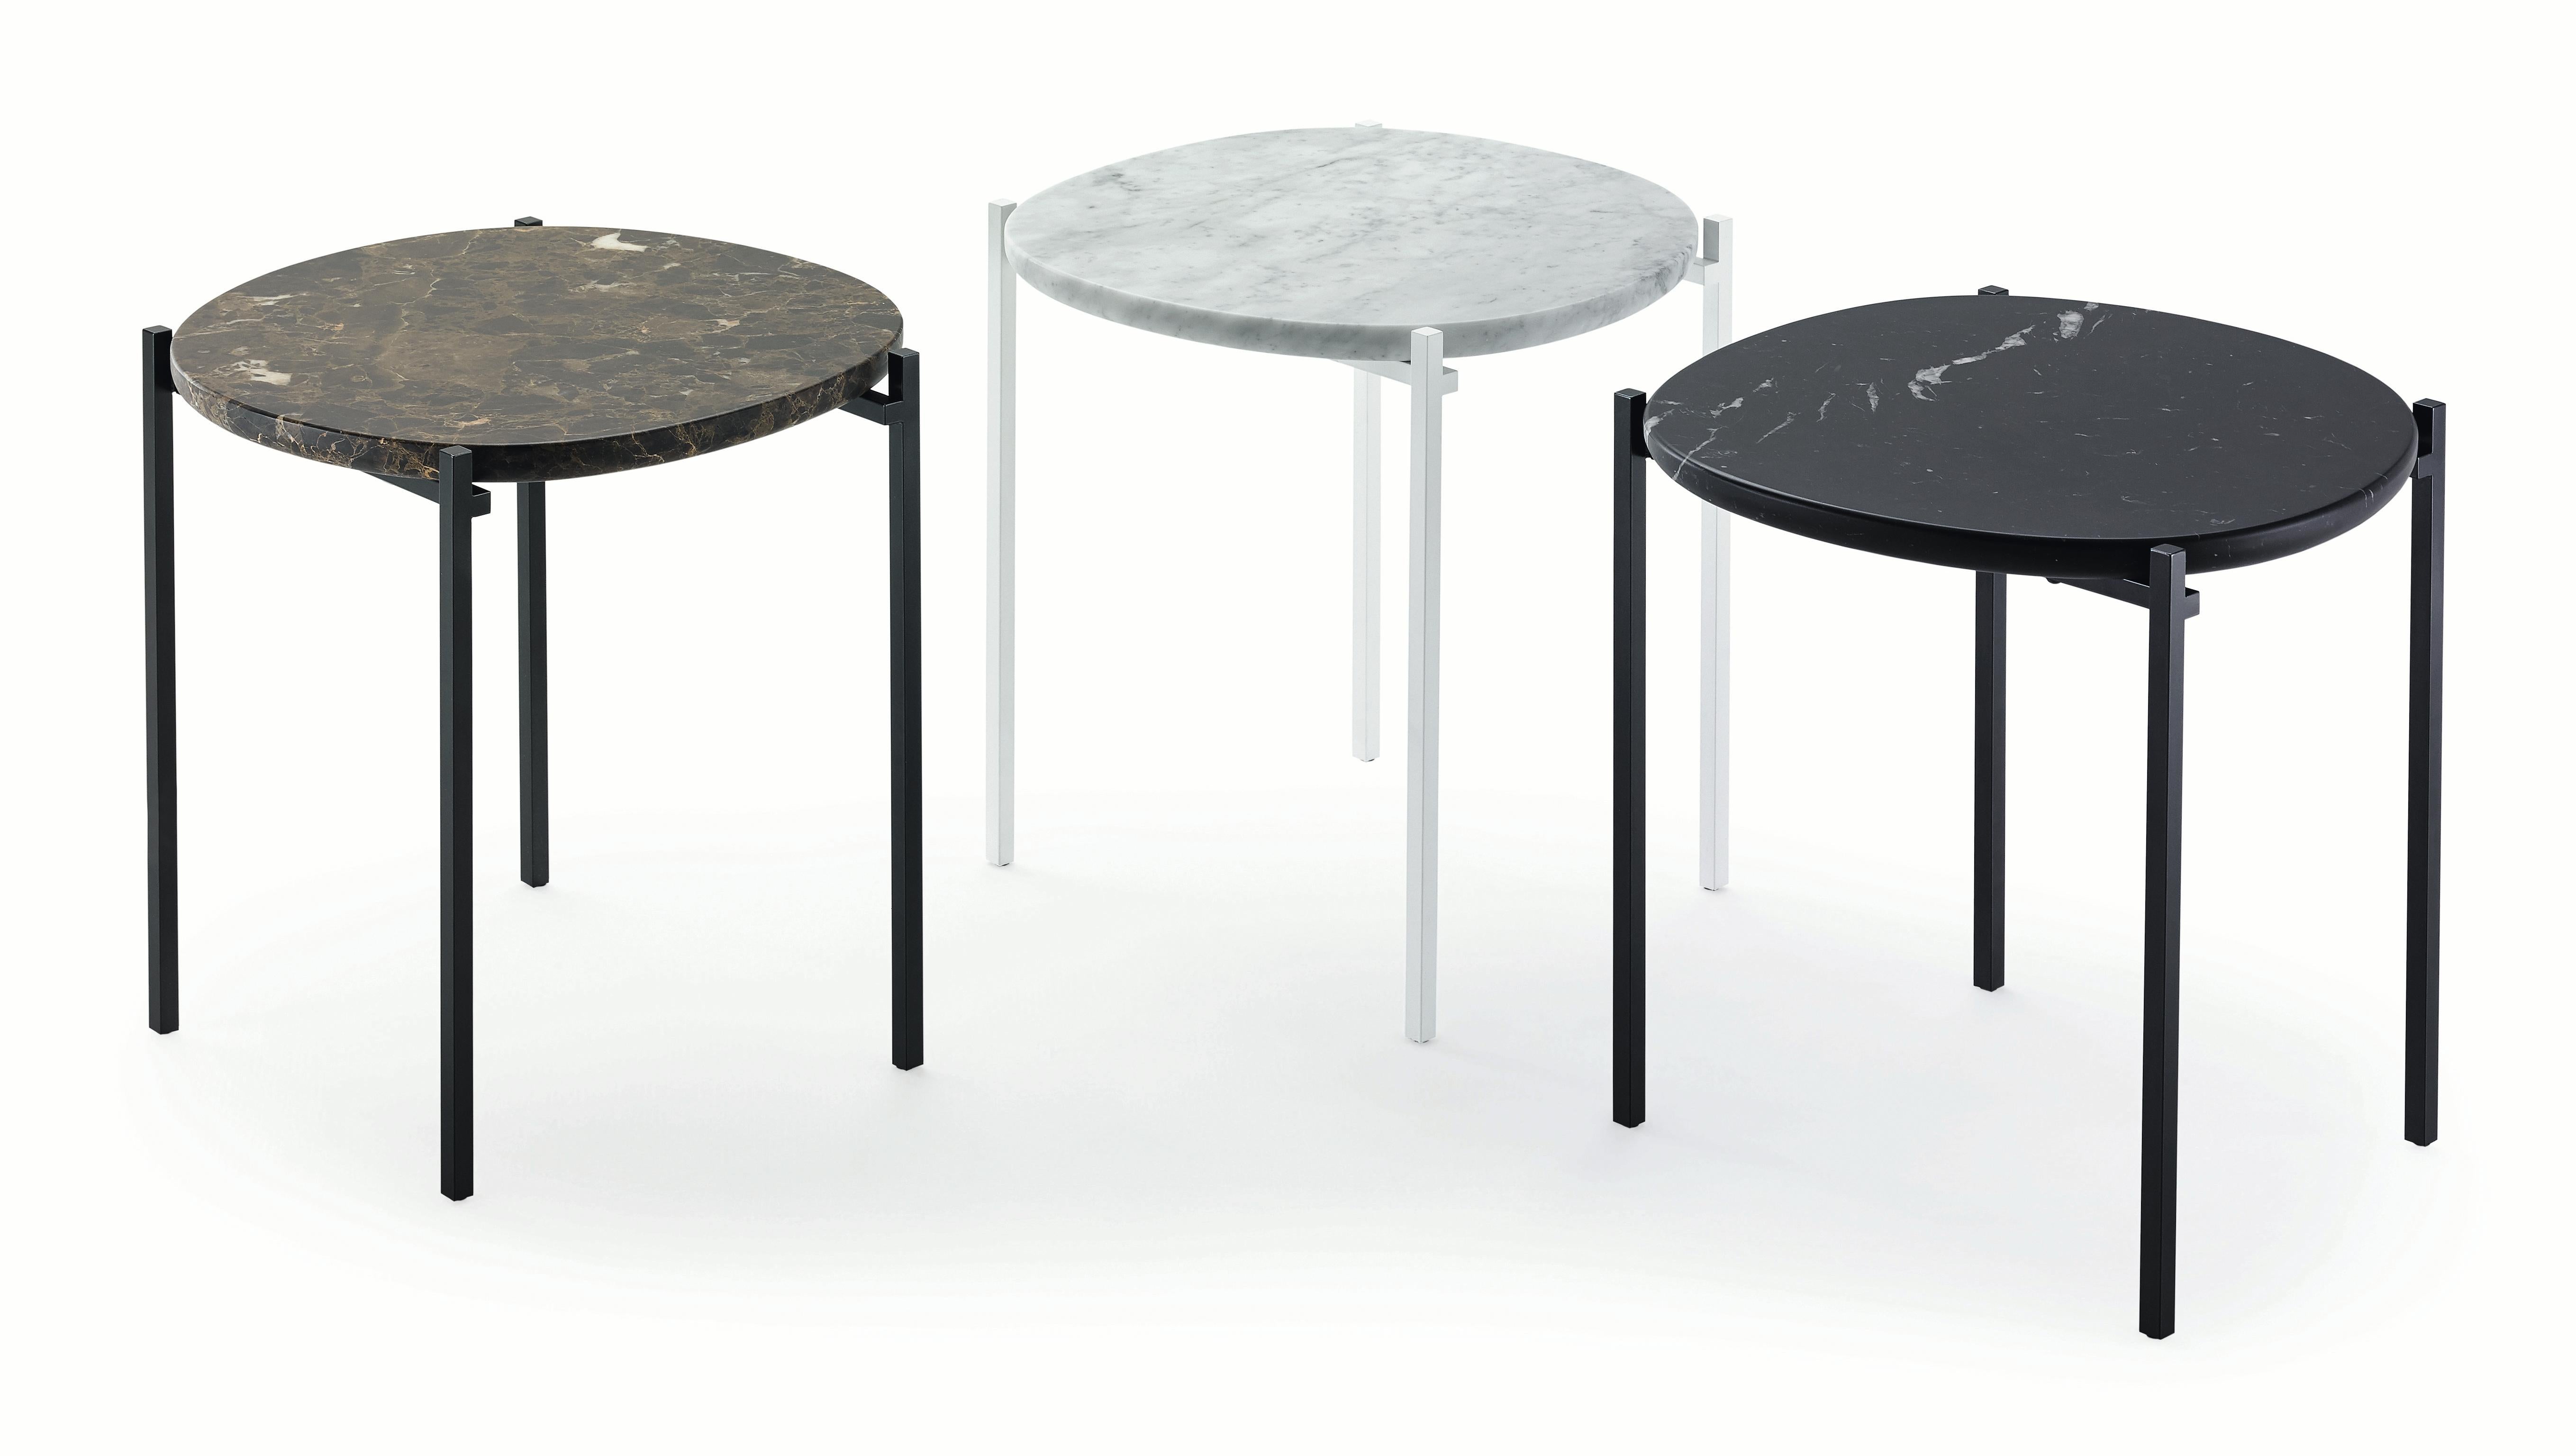 Zanotta Niobe Small Table with Black Marquinia Marble Top by Federica Capitani

Small table. Steel frame painted in the shades black or white. Tops available either in white Carrara marble, in black Marquinia marble or in Emperador marble, with